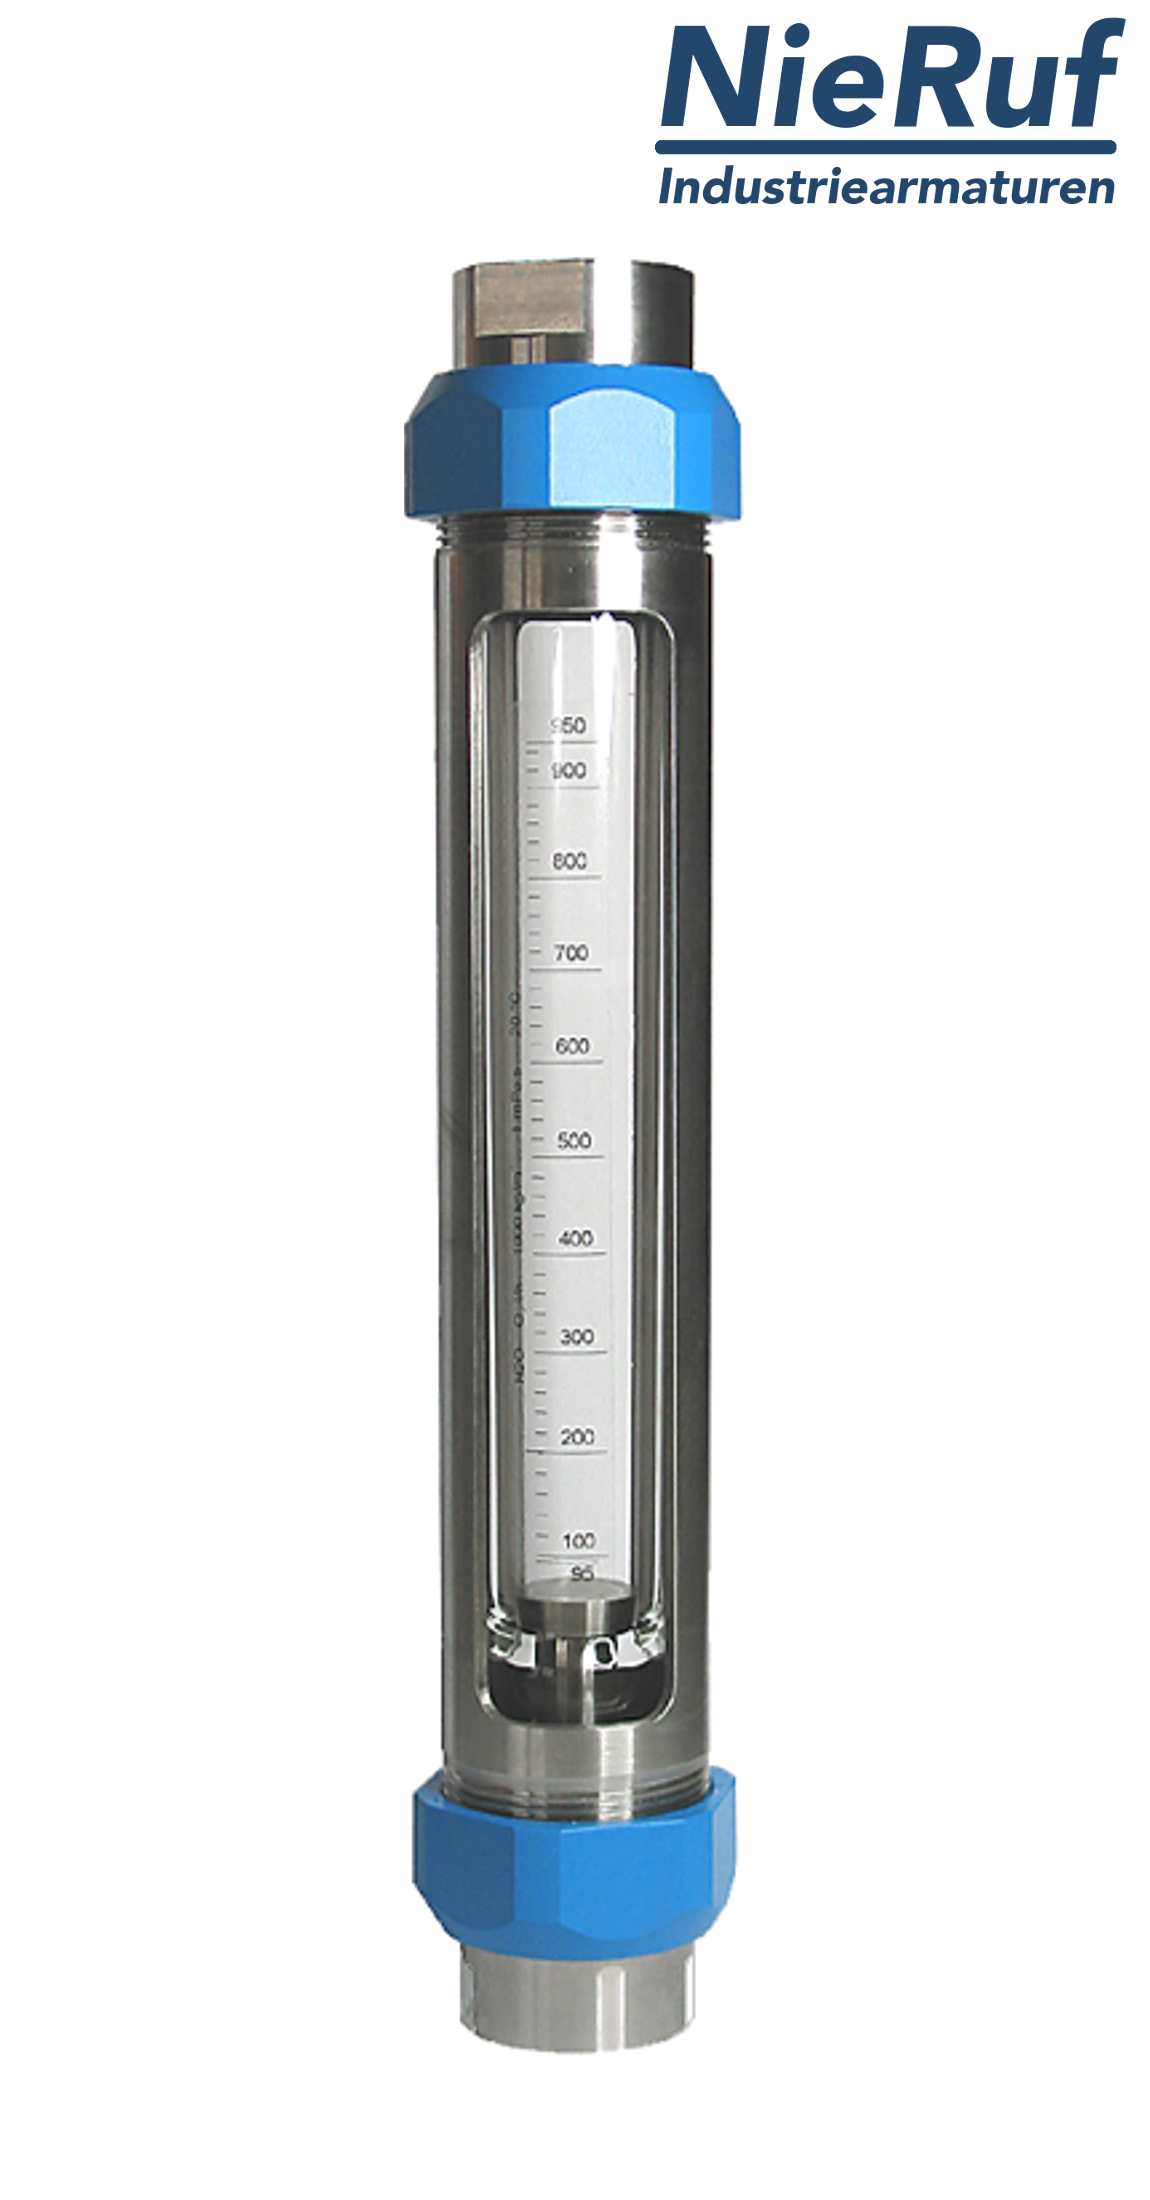 Variable area flowmeter stainless steel + borosilicate 1/4" inch 16.0 - 160 l/h air EPDM